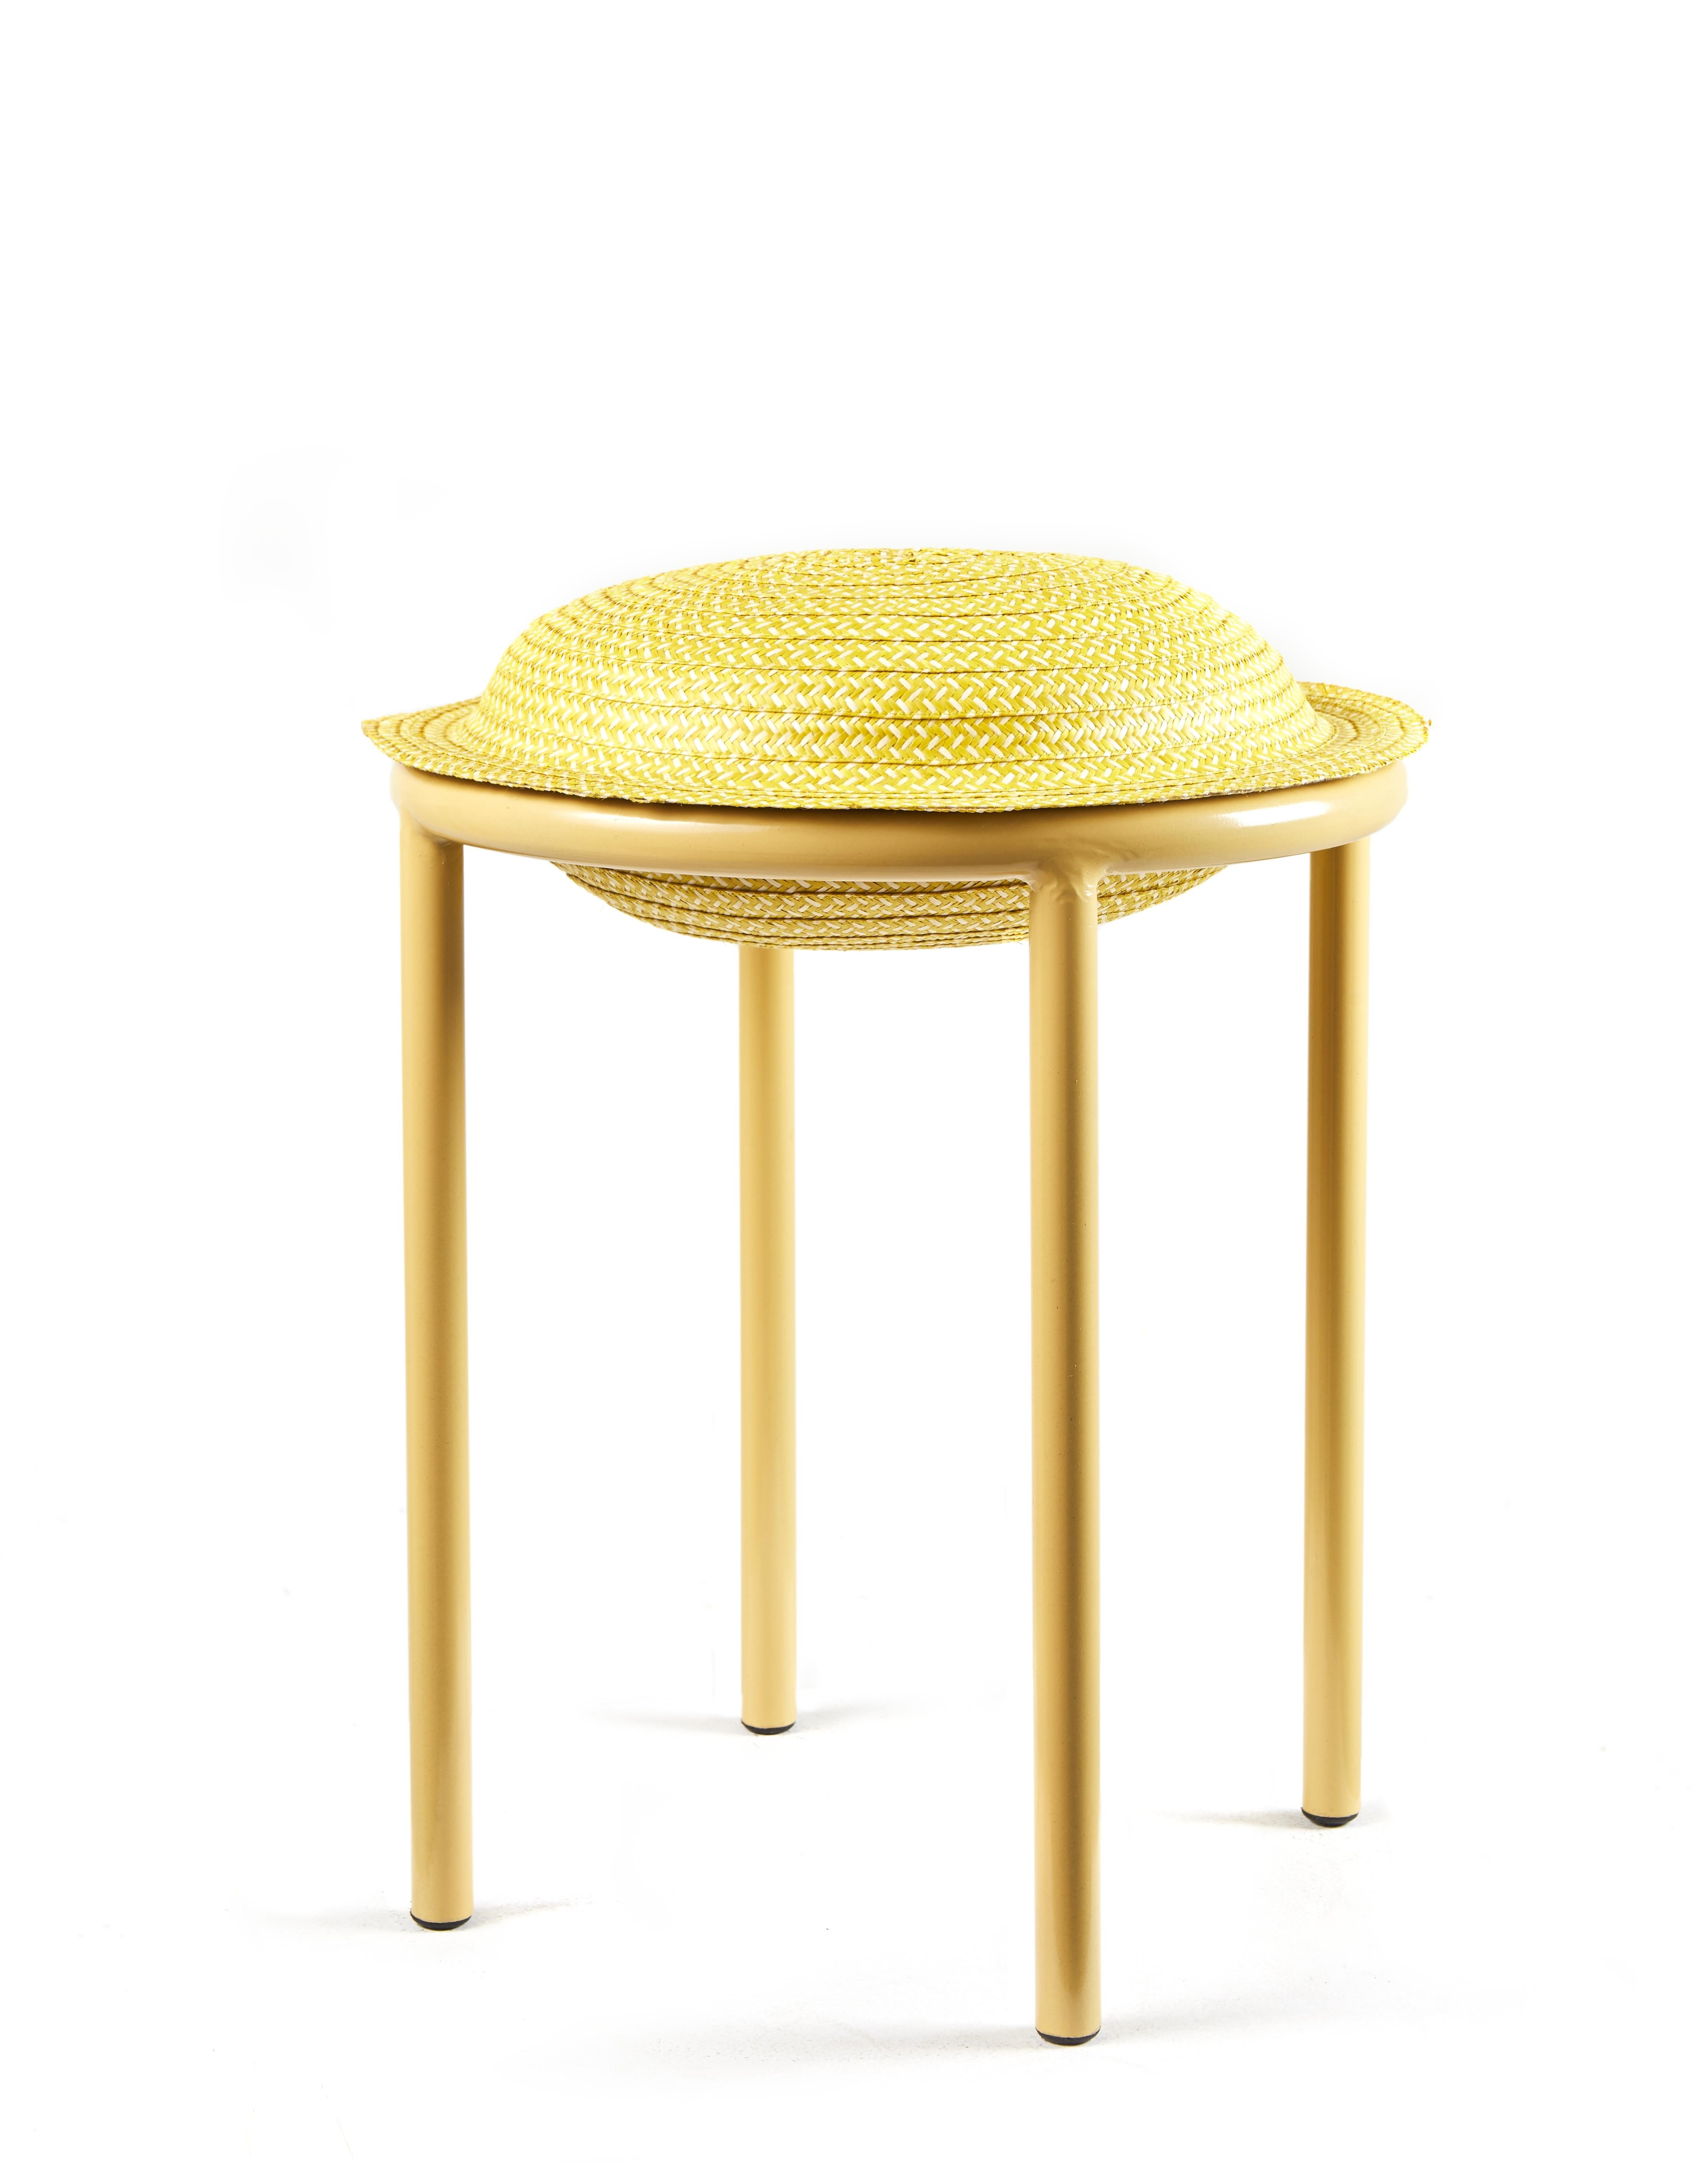 Yellow Cana stool by Pauline Deltour by Cristina Celestino
Materials: Galvanized and powder-coated tubular steel. Caña Flecha.
Technique: Hand-woven with natural fibers in Colombia. Natural dyed. 
Dimensions: Diameter 40.2 x height 48.1 cm